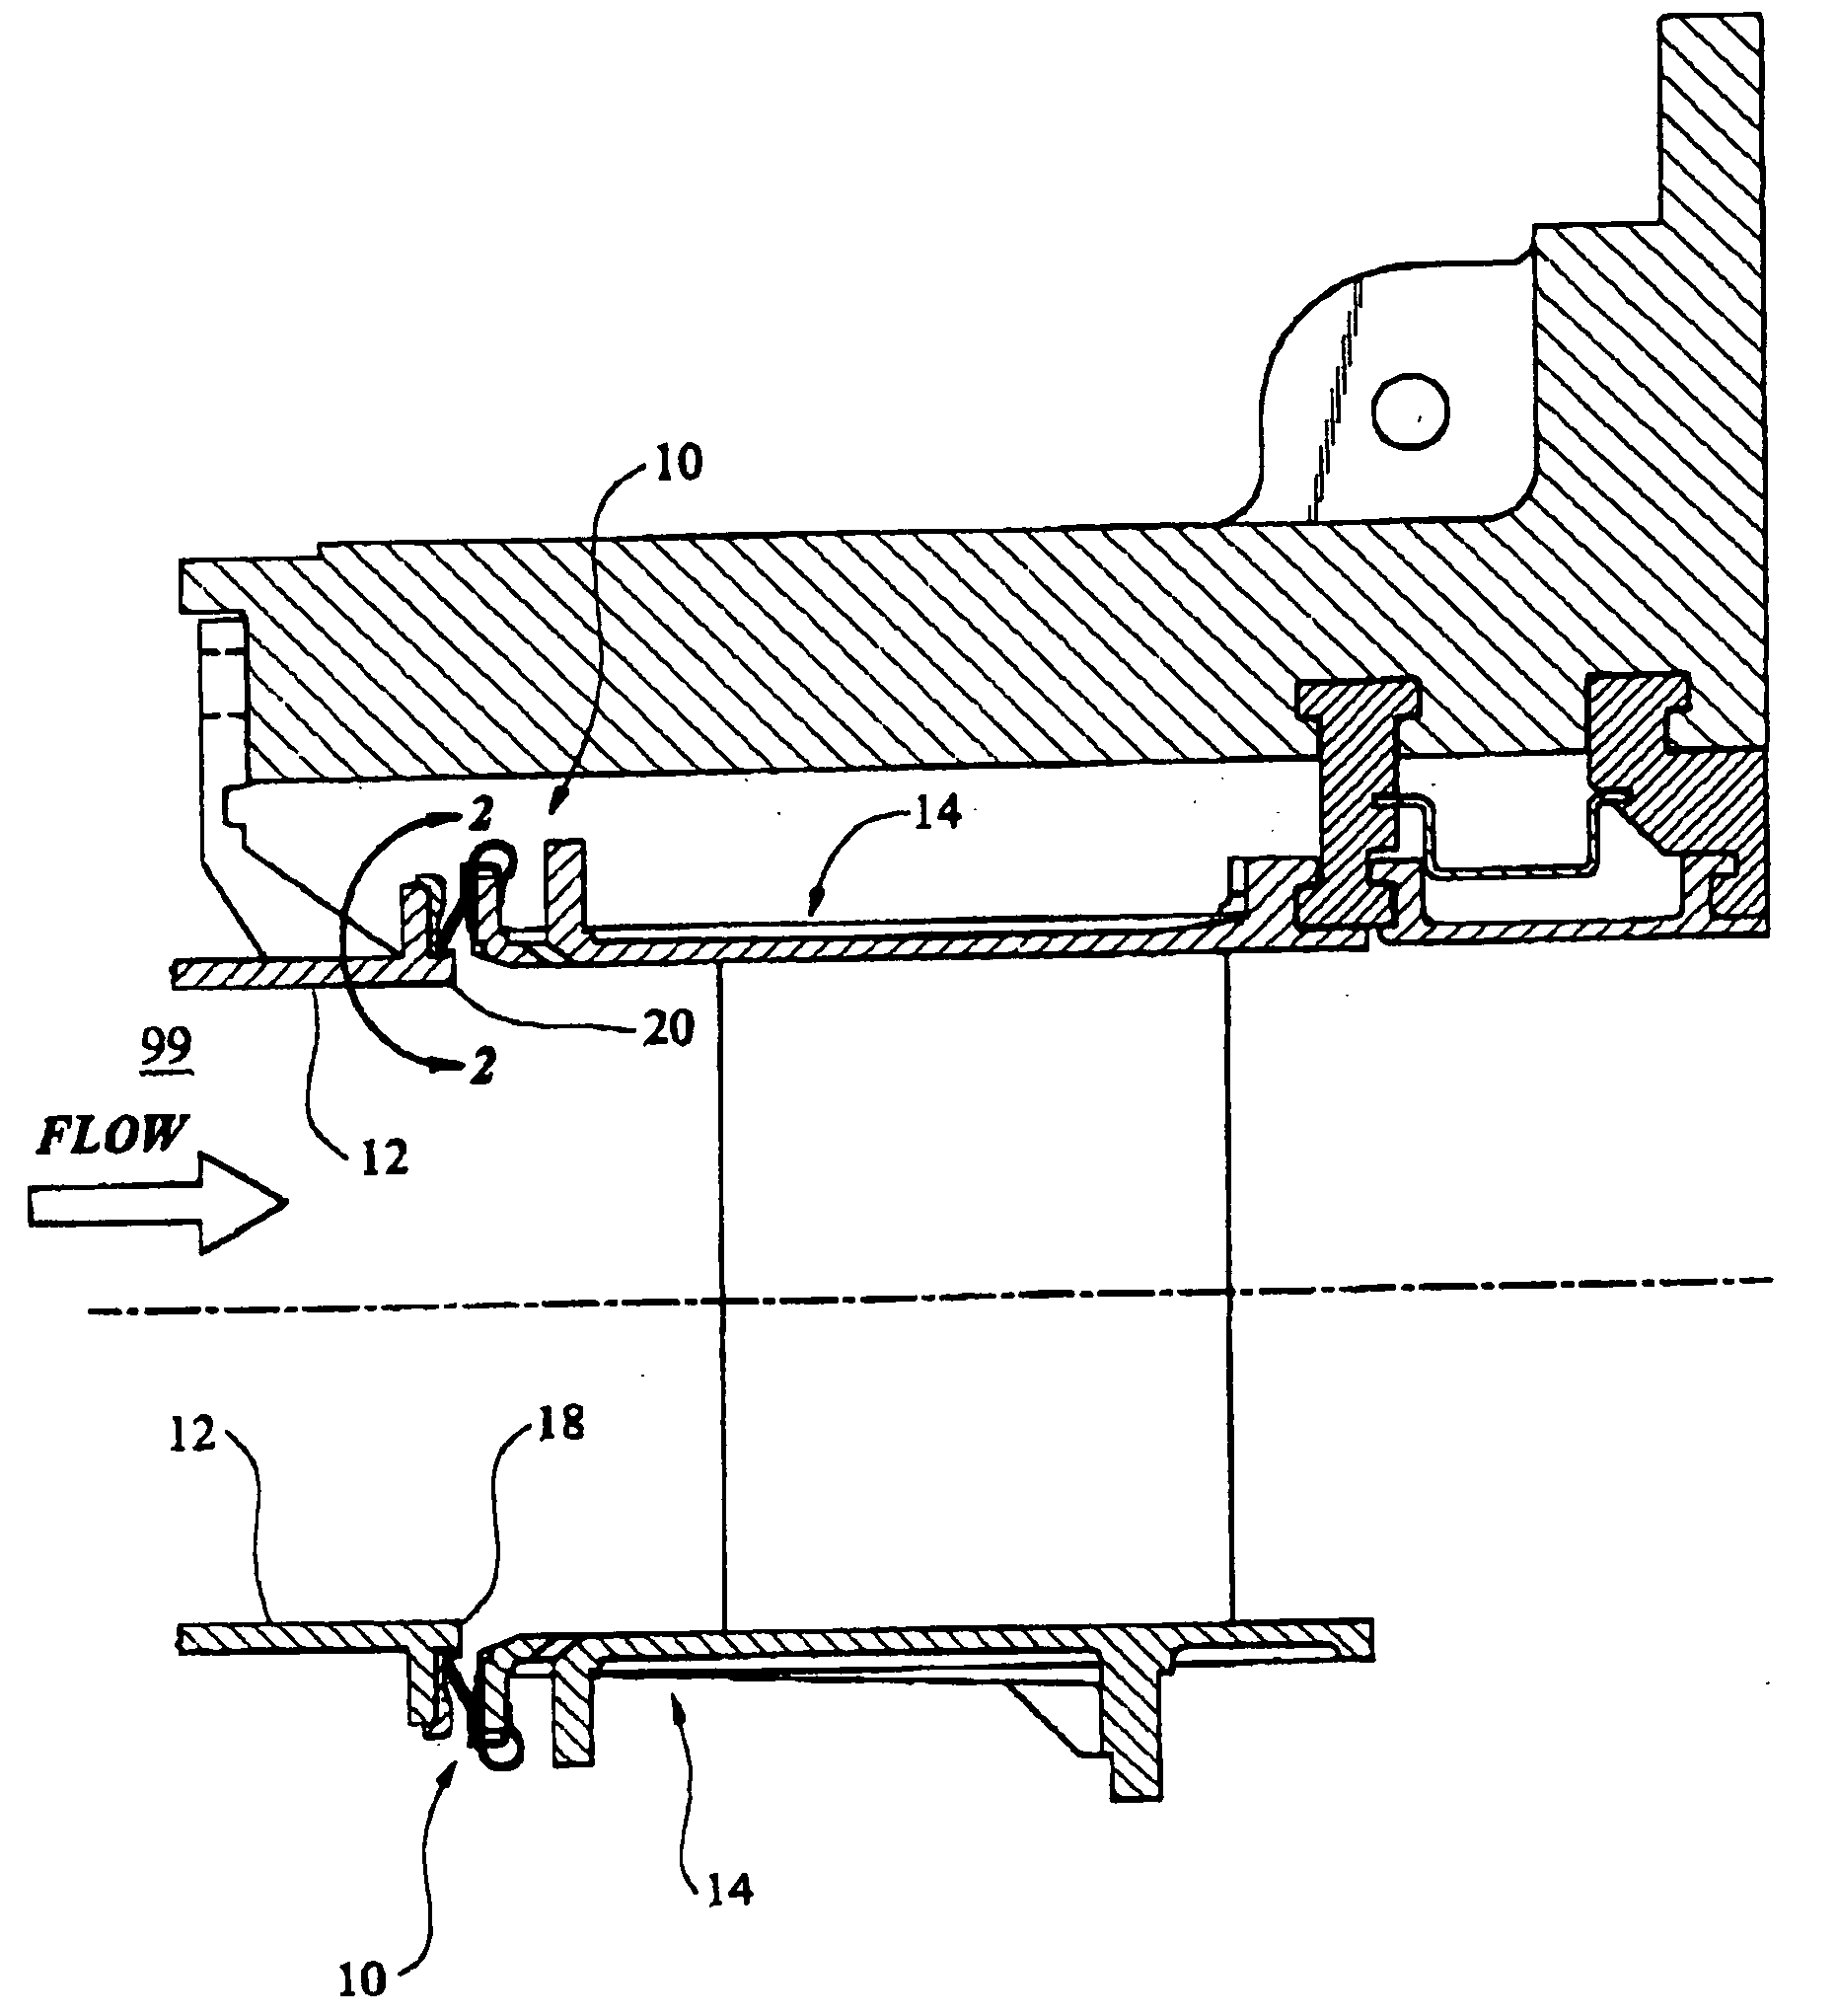 Seal usable between a transition and a turbine vane assembly in a turbine engine